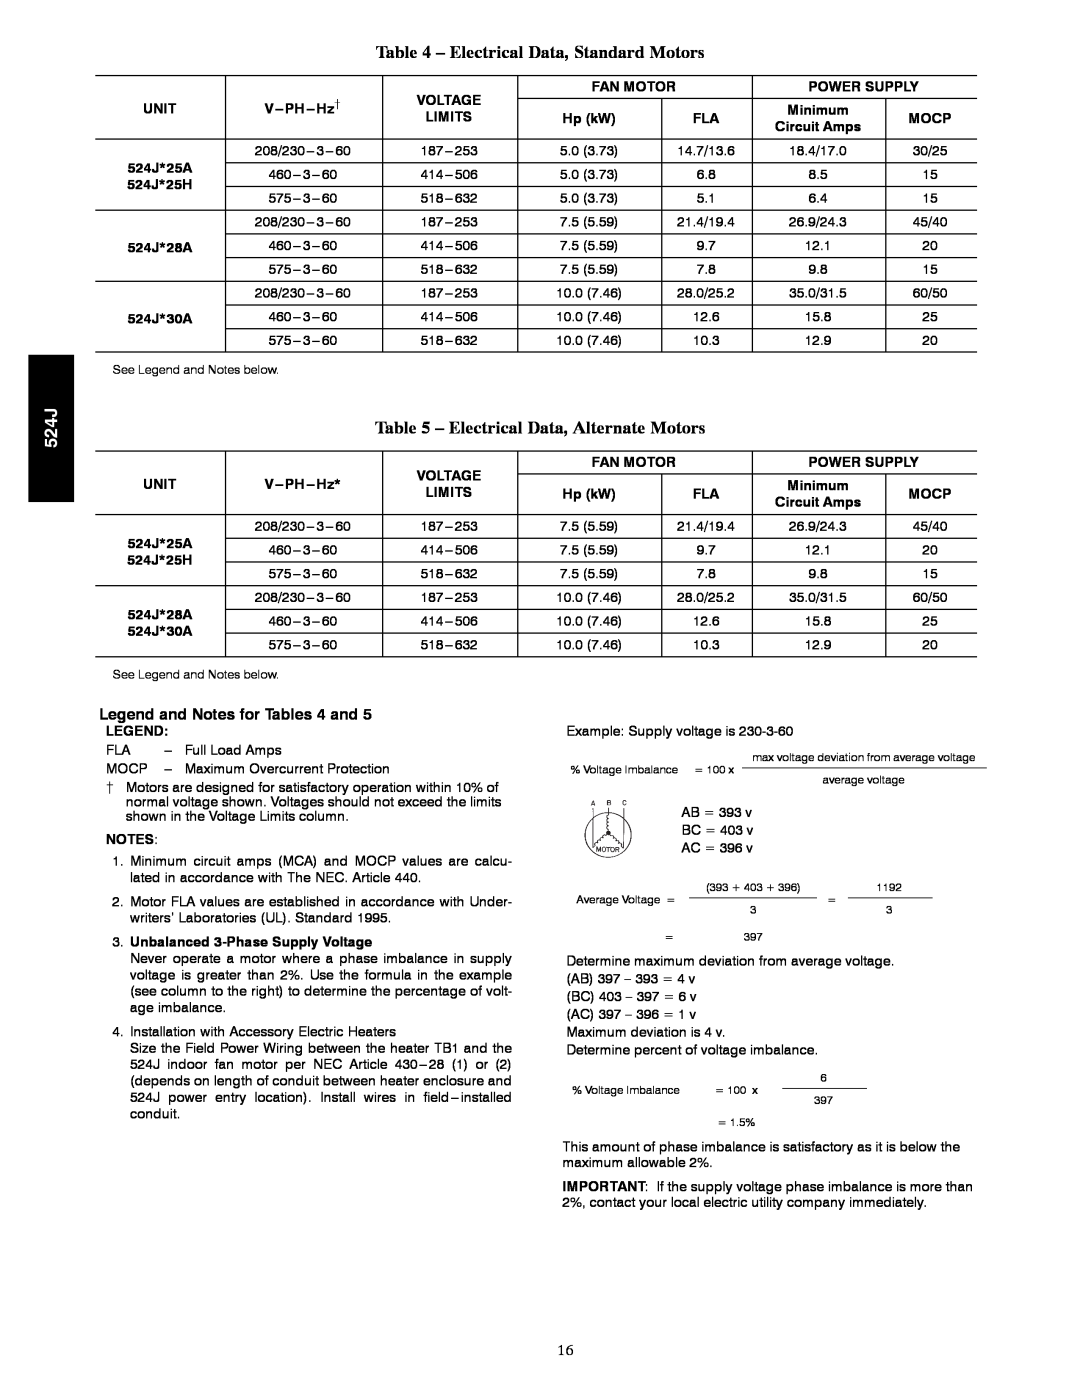 Bryant 524J manual Electrical Data, Standard Motors, Electrical Data, Alternate Motors, Legend and Notes for Tables 4 and 